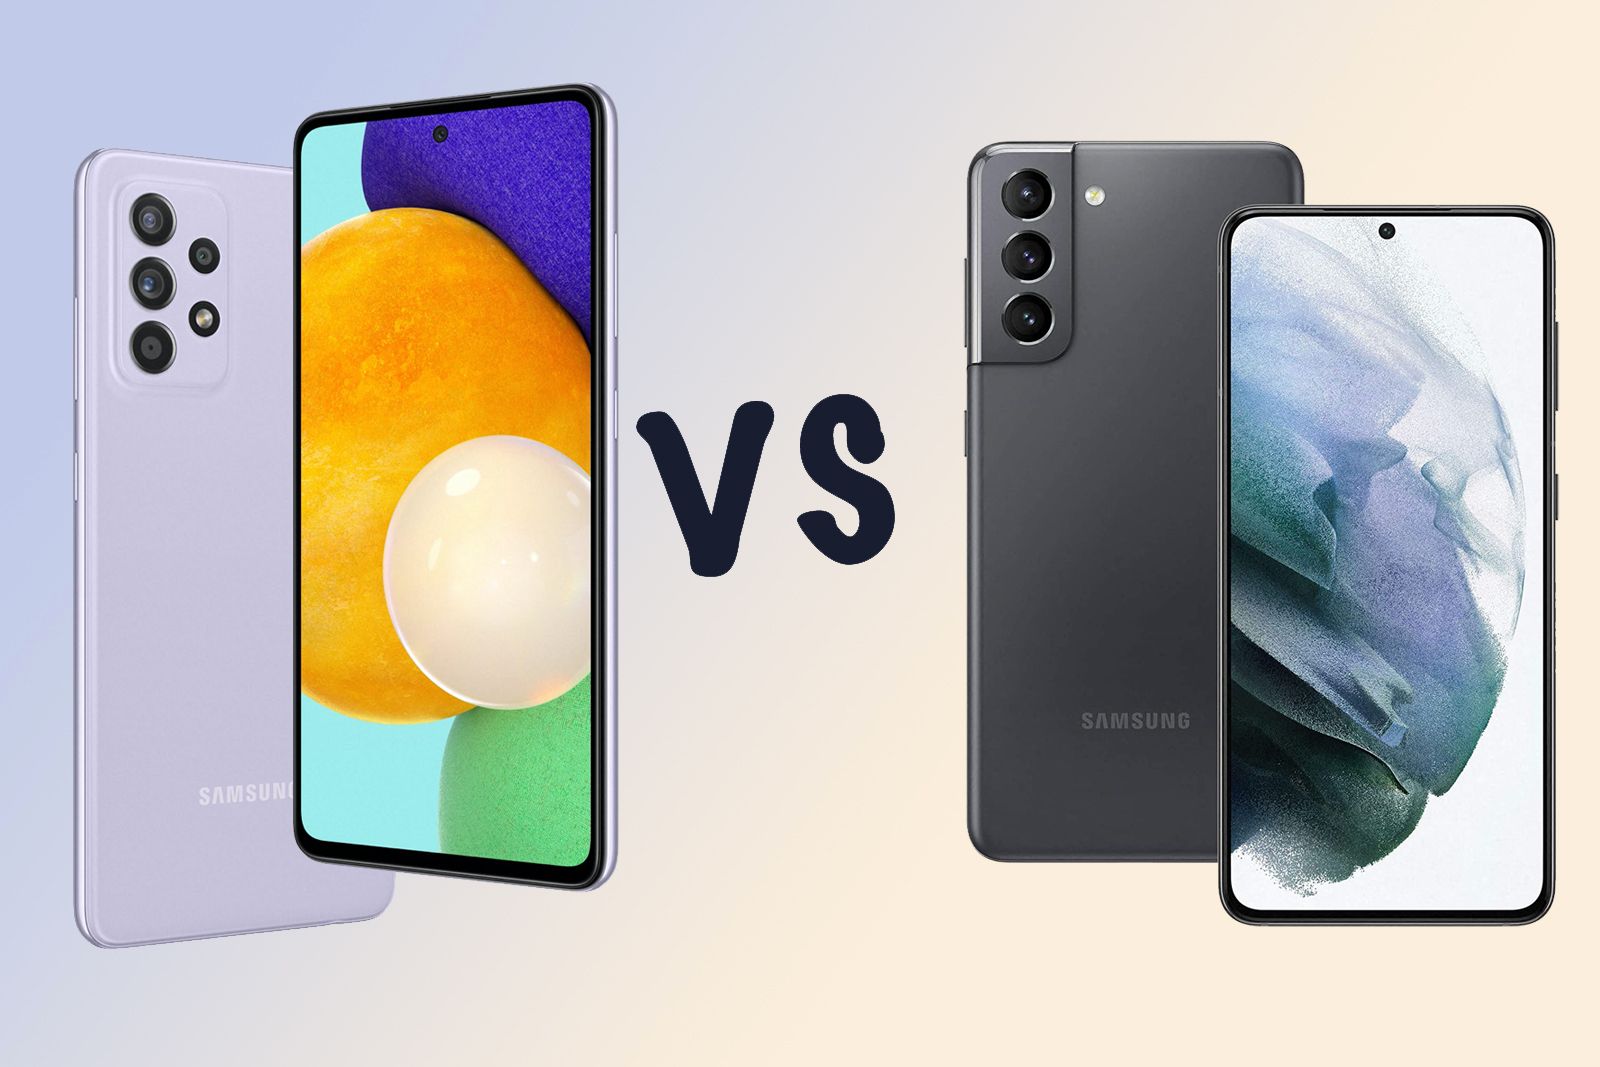 Samsung Galaxy A52 5G vs Galaxy S21 vs S21+: What's the difference? photo 1